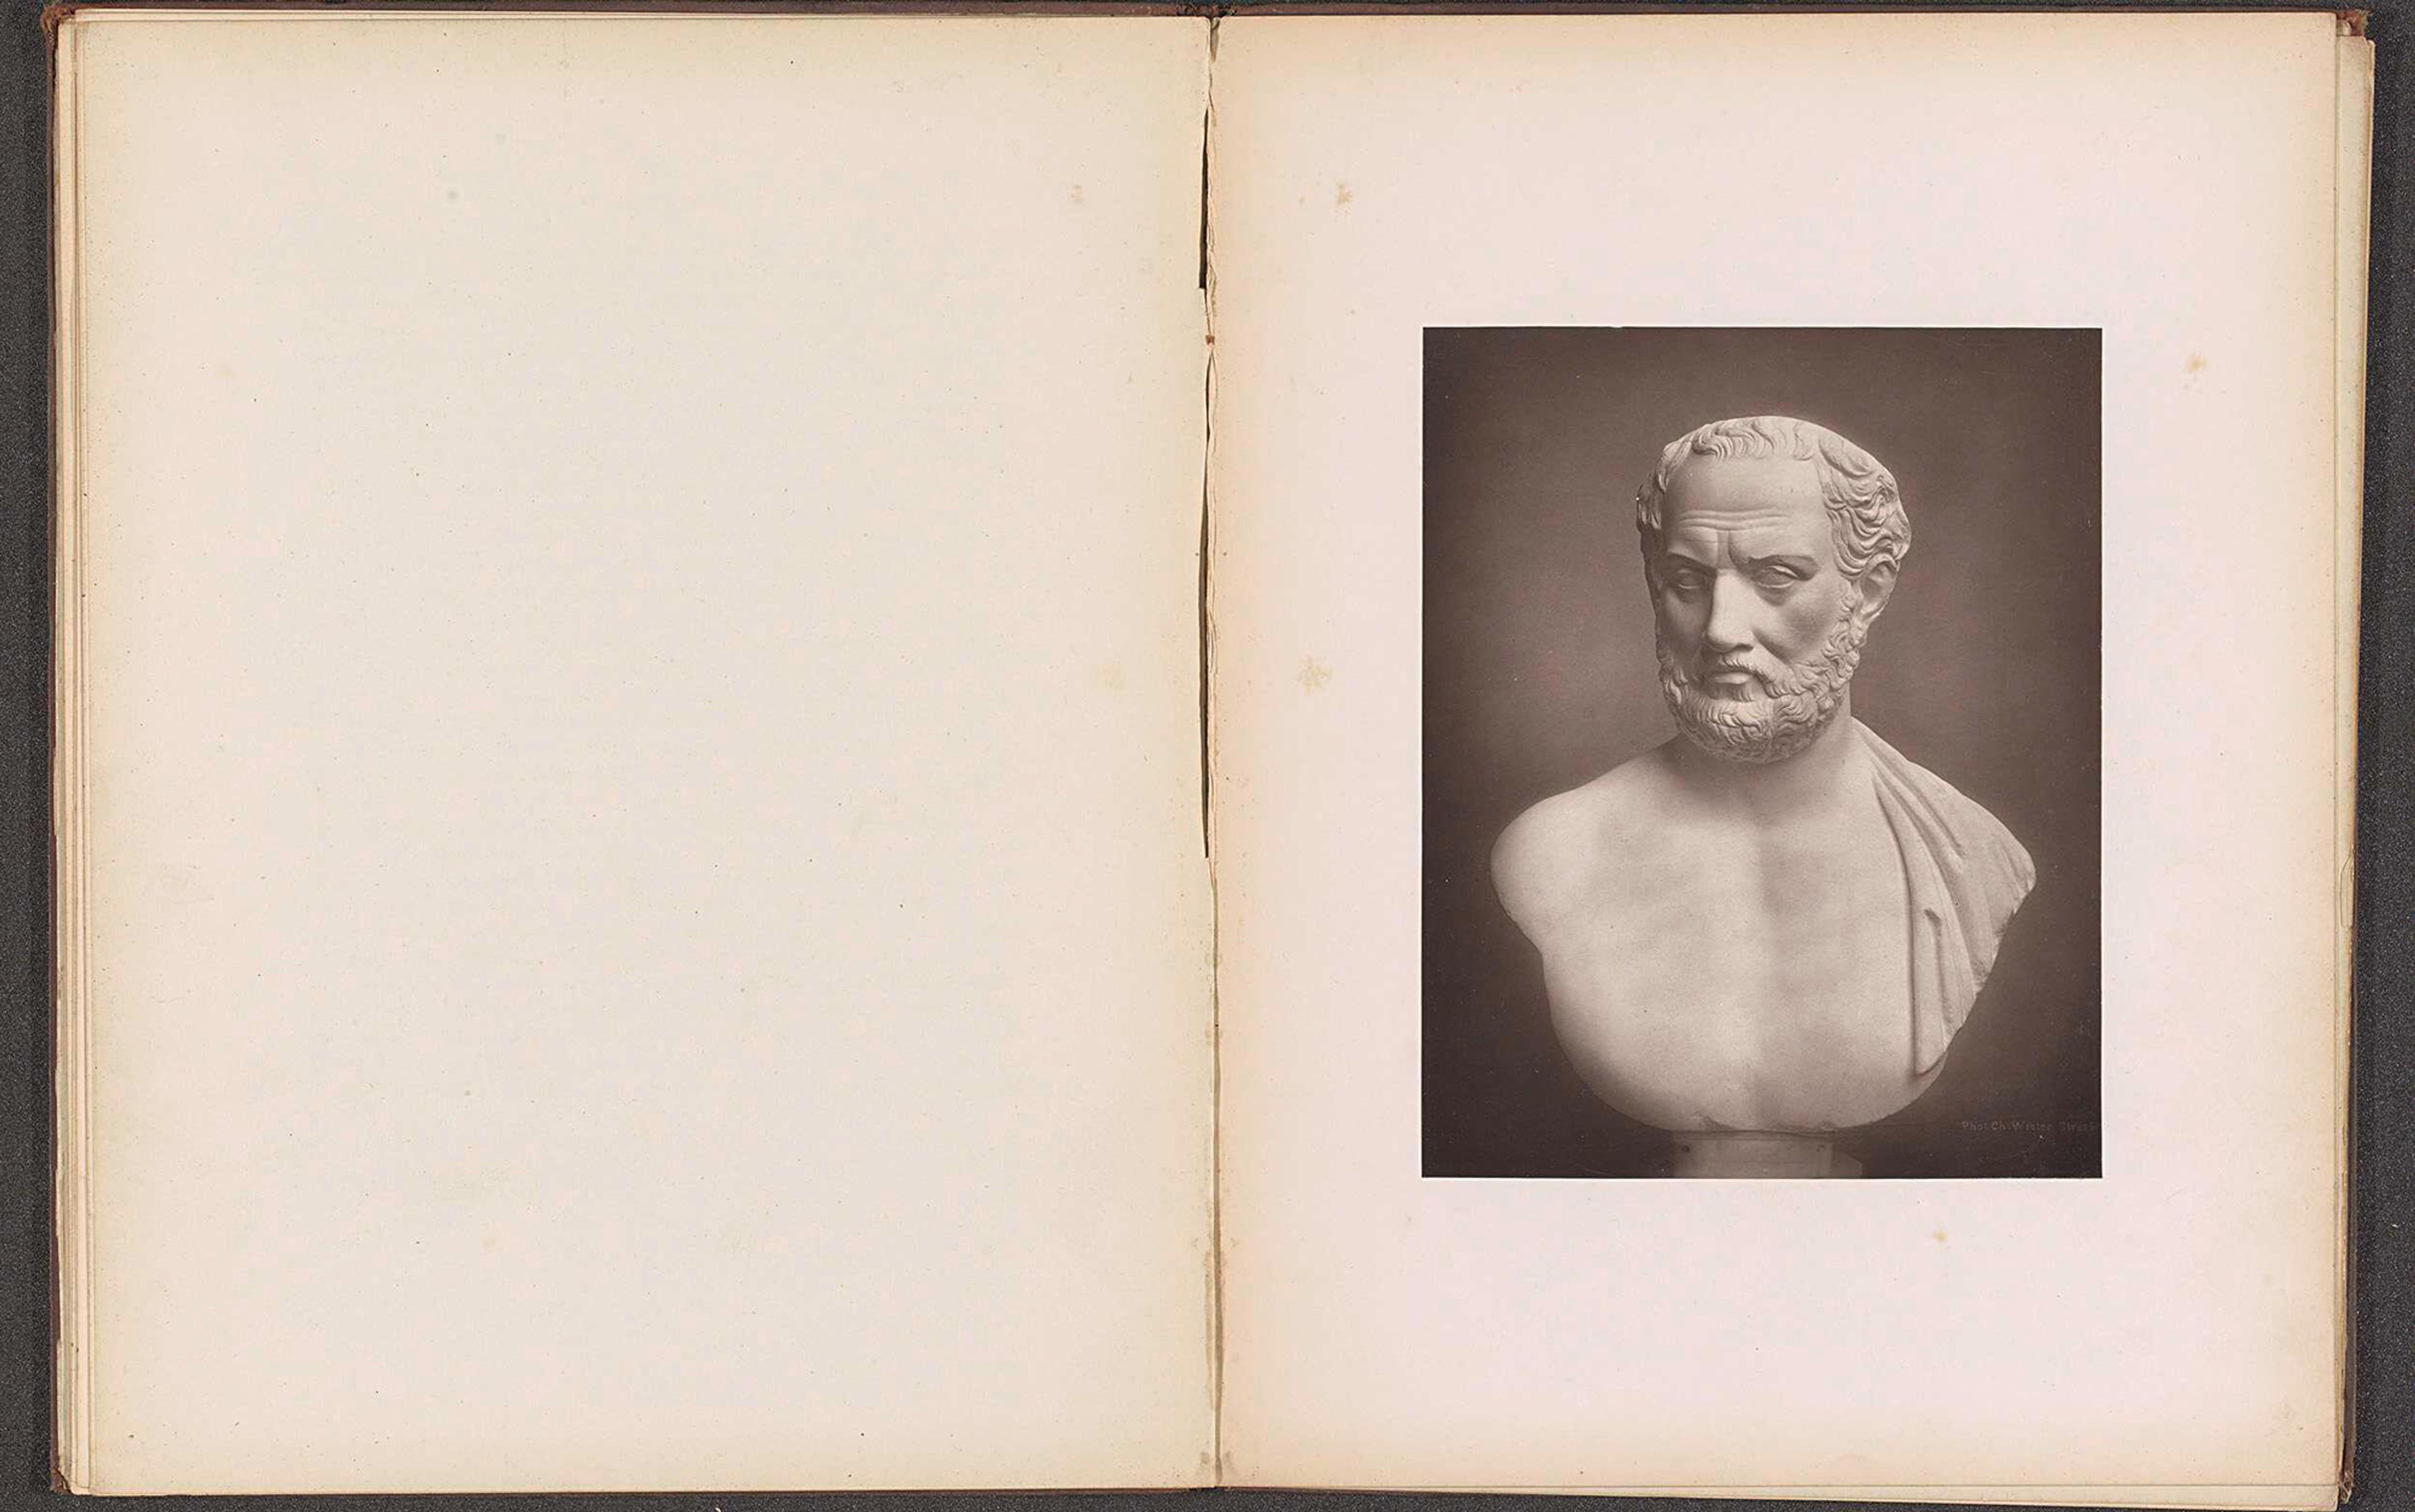 A marble bust of Thucydides is shown on a page from an old book. The opposite page is blank.